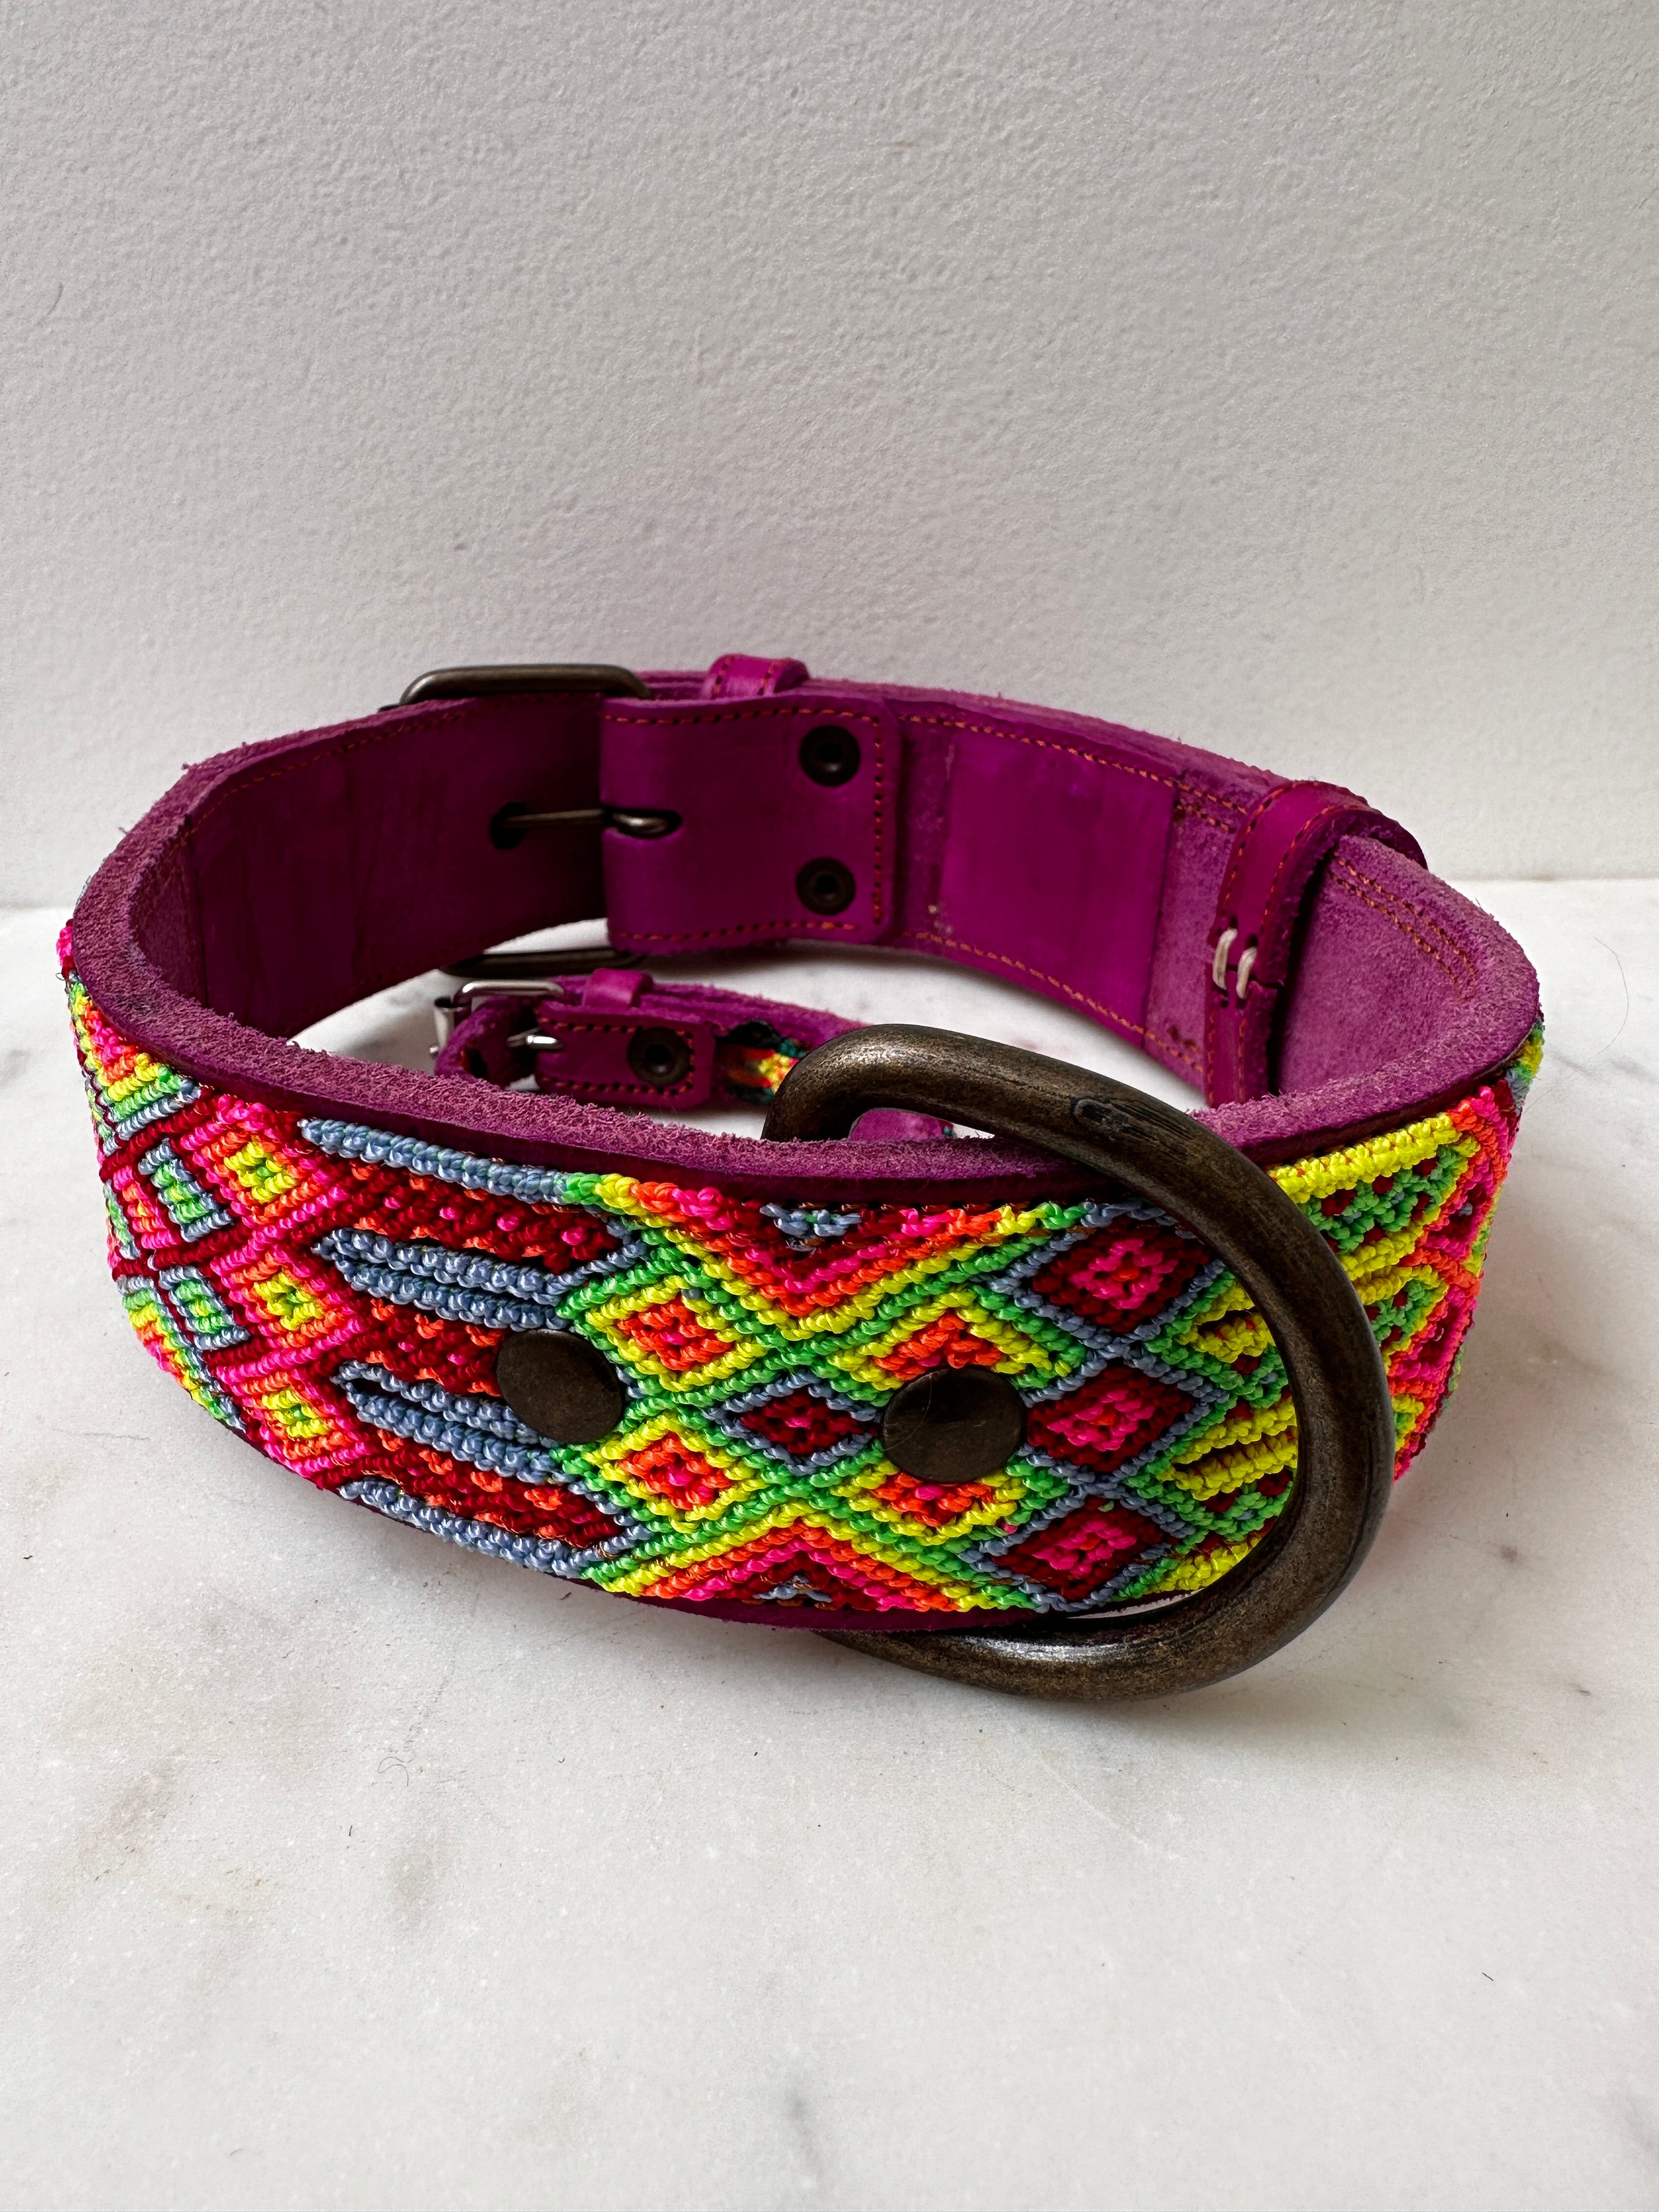 Future Nomads Homewares One Size Huichol Leather Wide Dog Collar L1